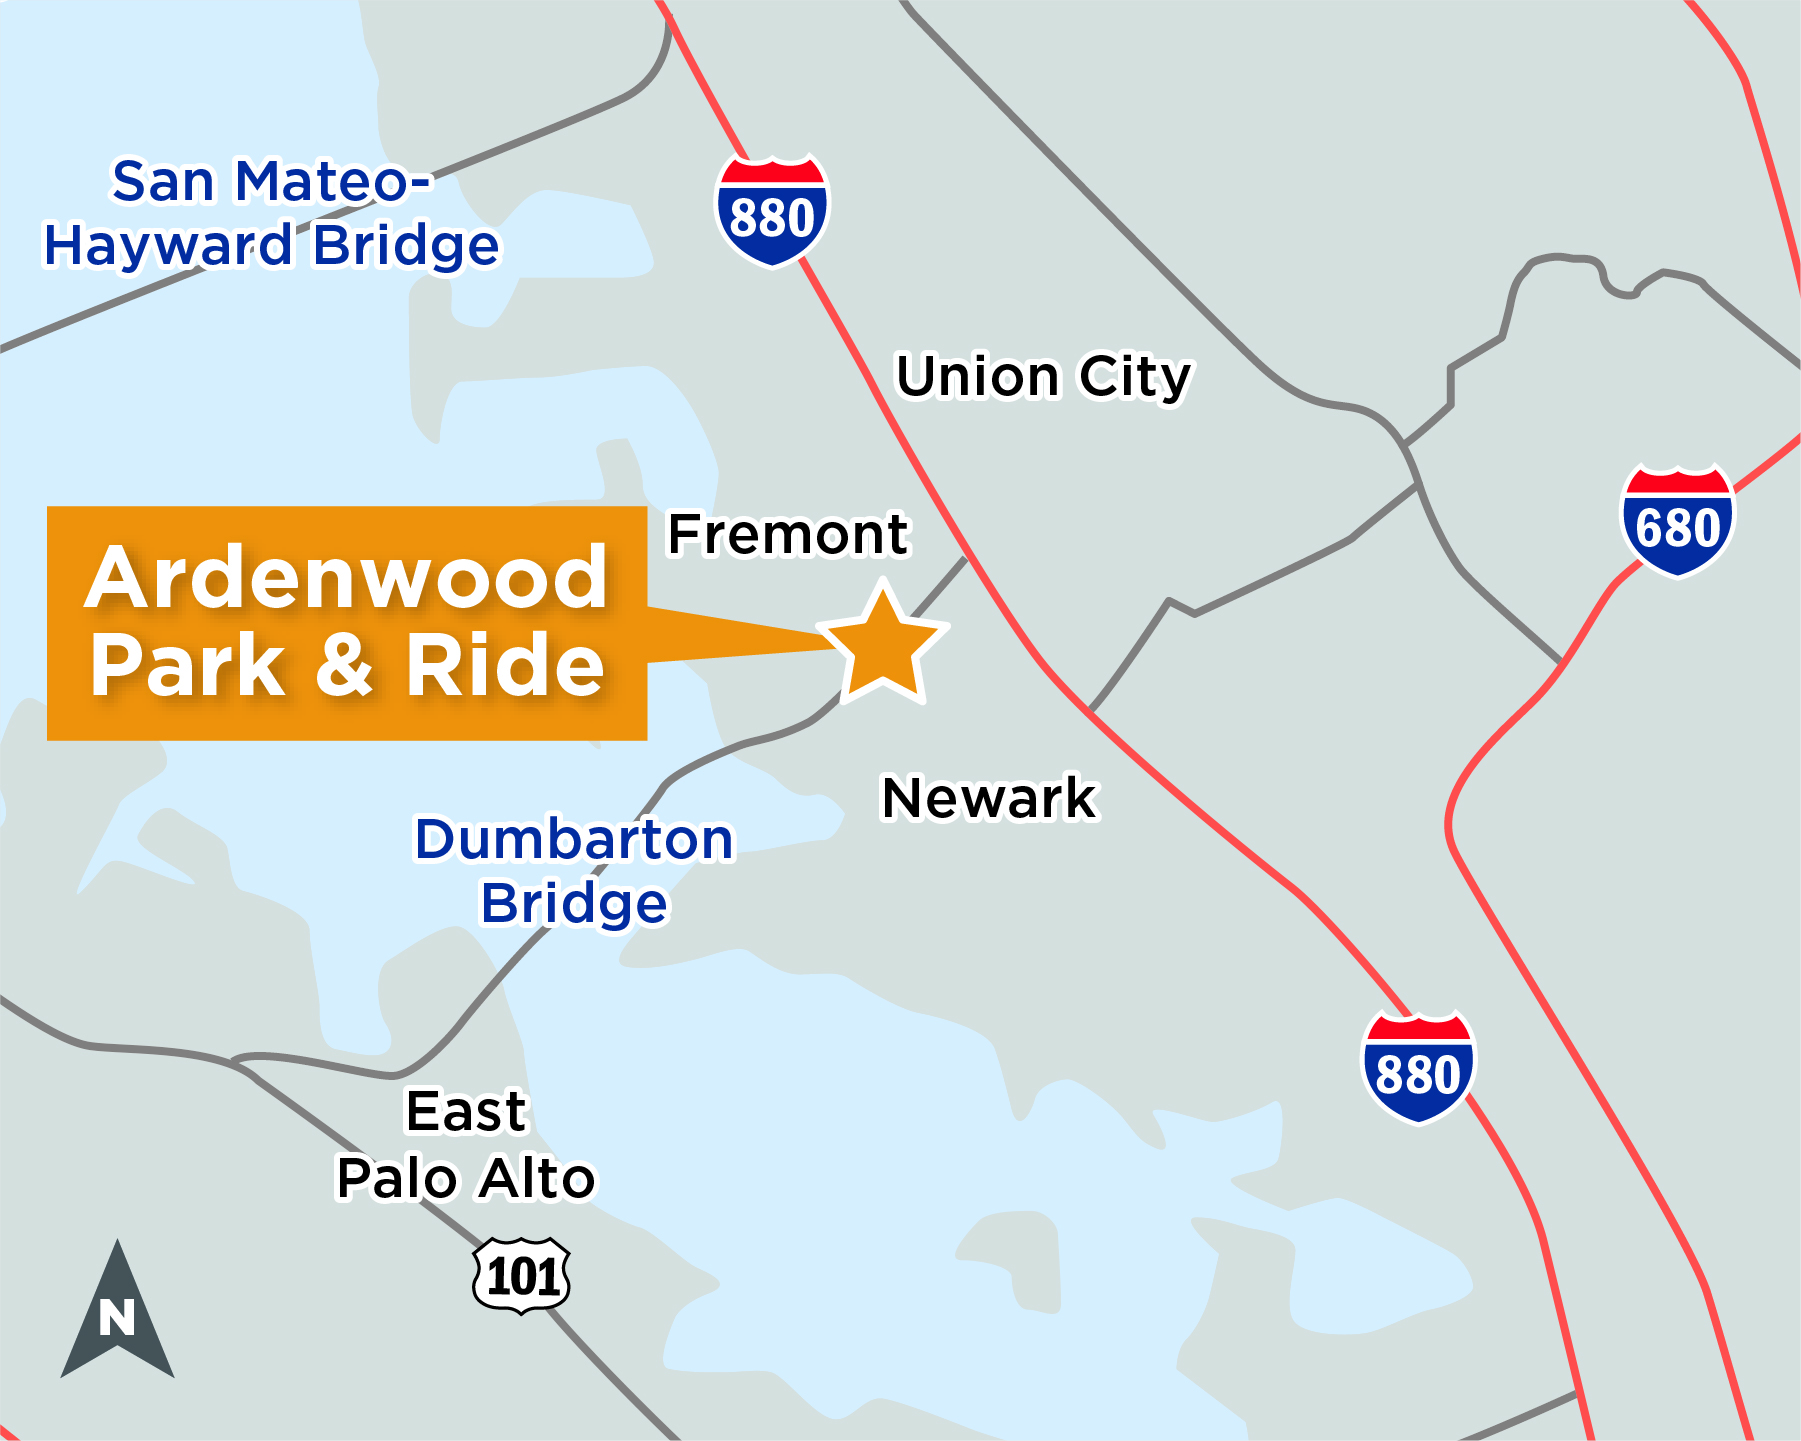 This is a map that shows the project area in relation to the broader areas of The San Mateo Bridge, Union City, Fremont, Newark, and East Palo Alto. The project area is shown with a star symbol on the eastern part of the Dumbarton Bridge. 